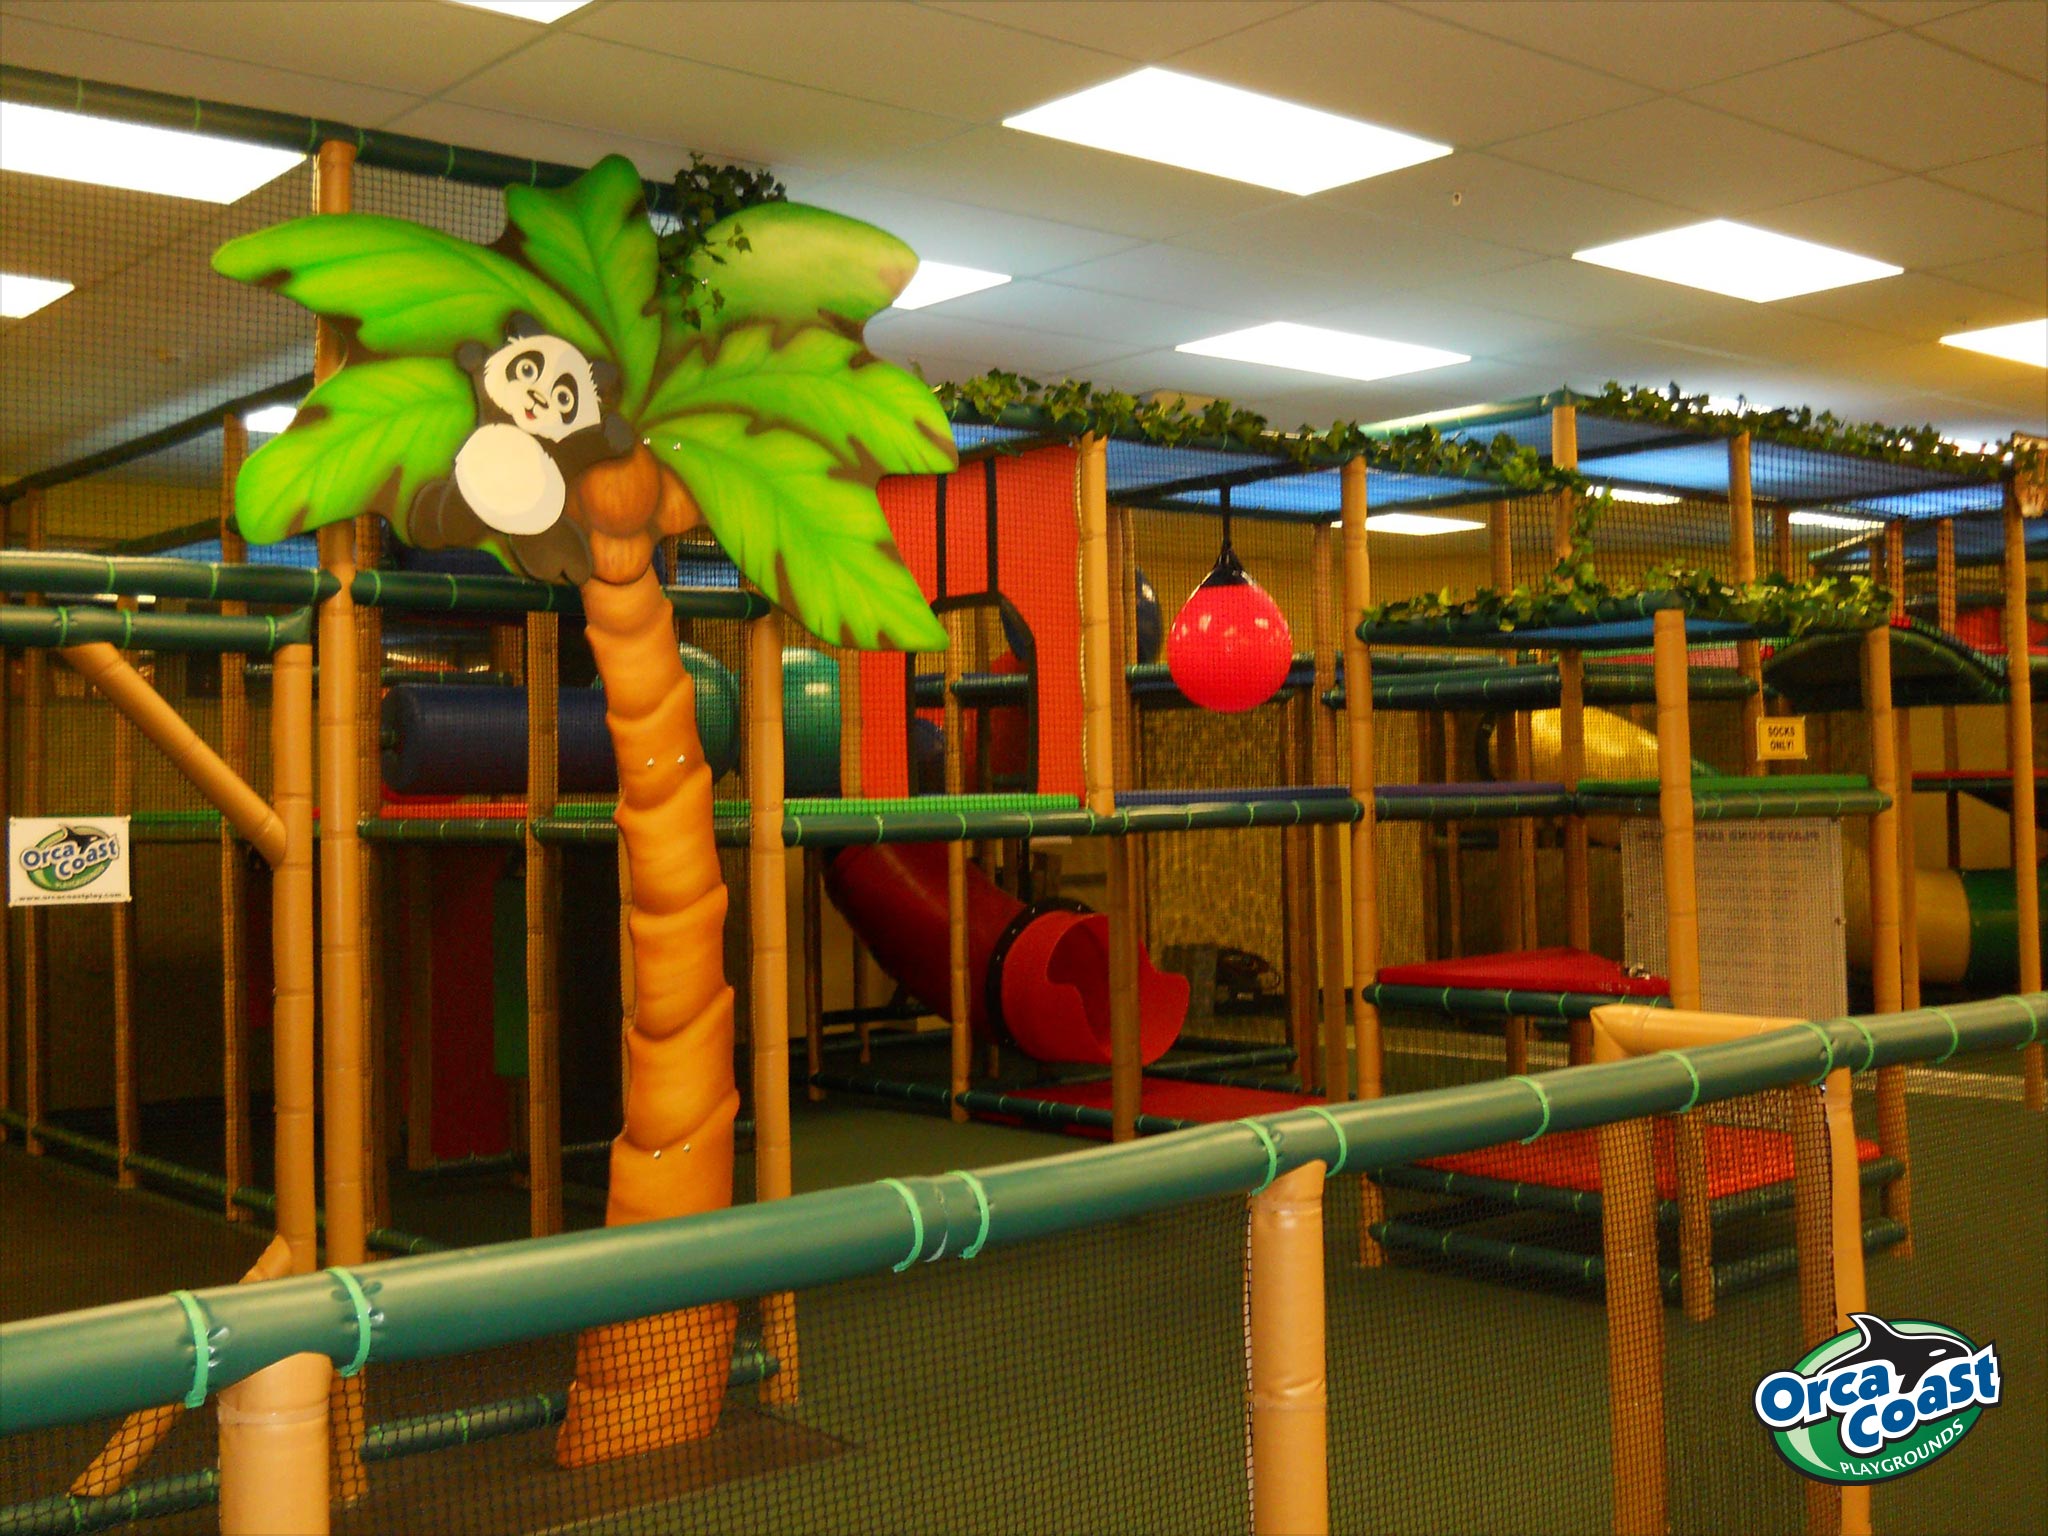 Jungle Jolt, a themed indoor playground in Webster, NY